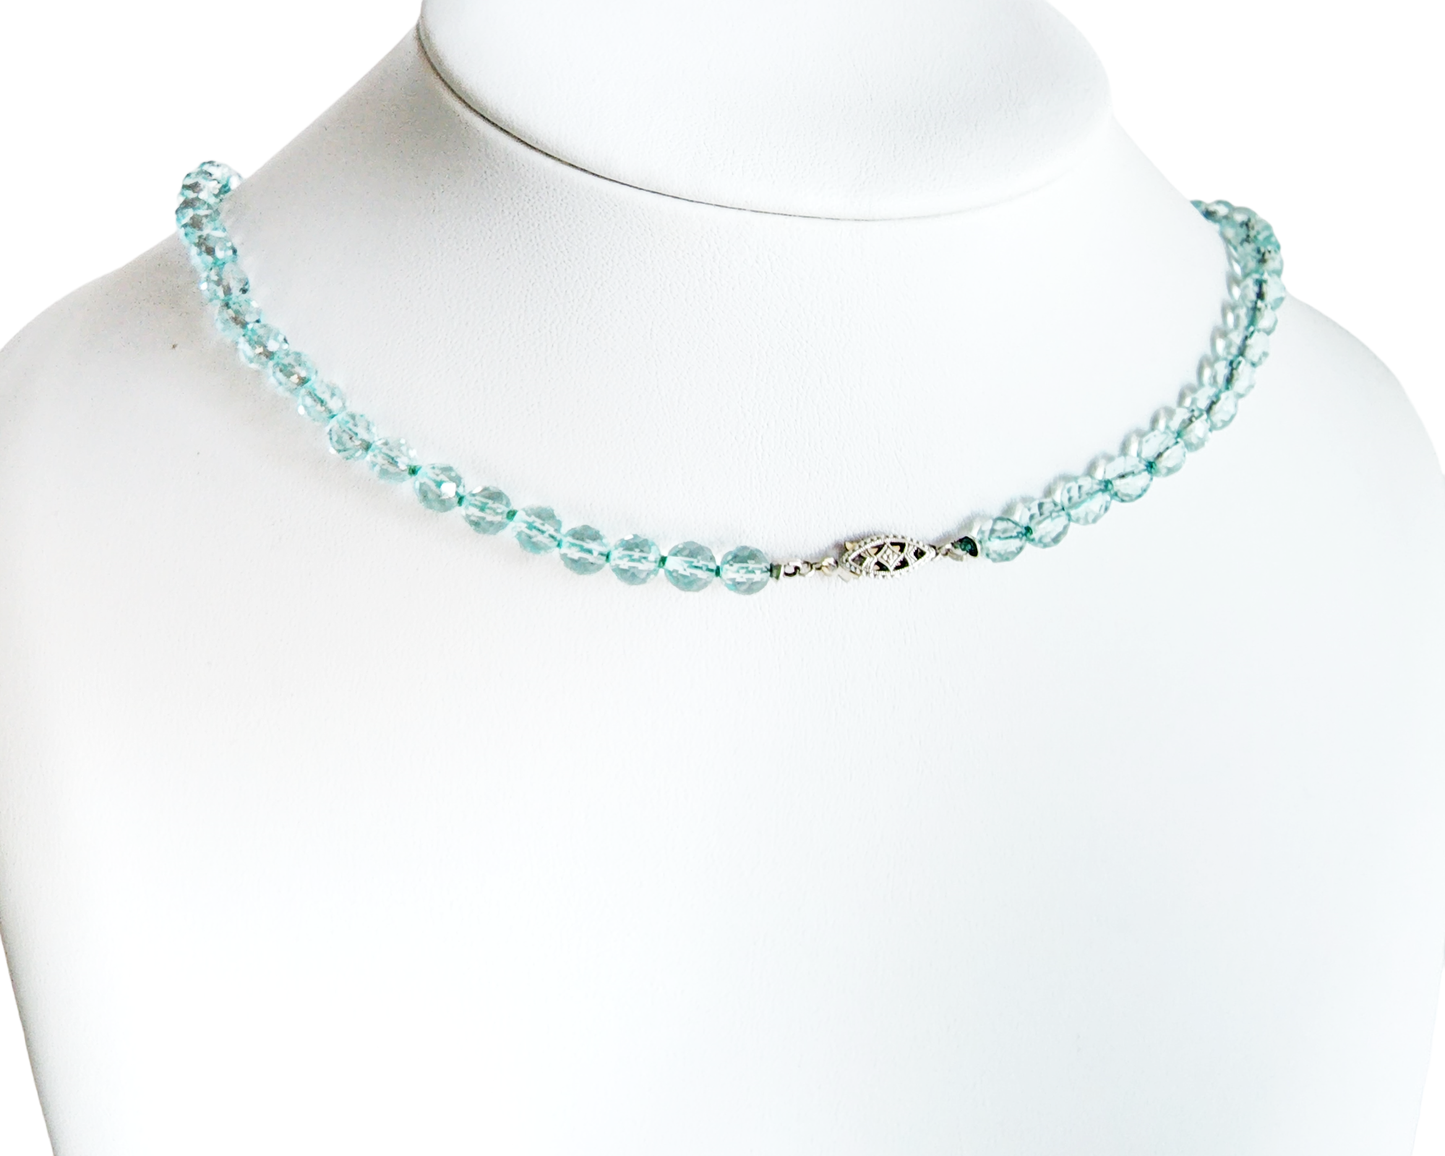 Vintage Romance Aquamarine Necklace, hand knotted translucent, aqua blue faceted stones with Vintage Sterling Silver clasp.